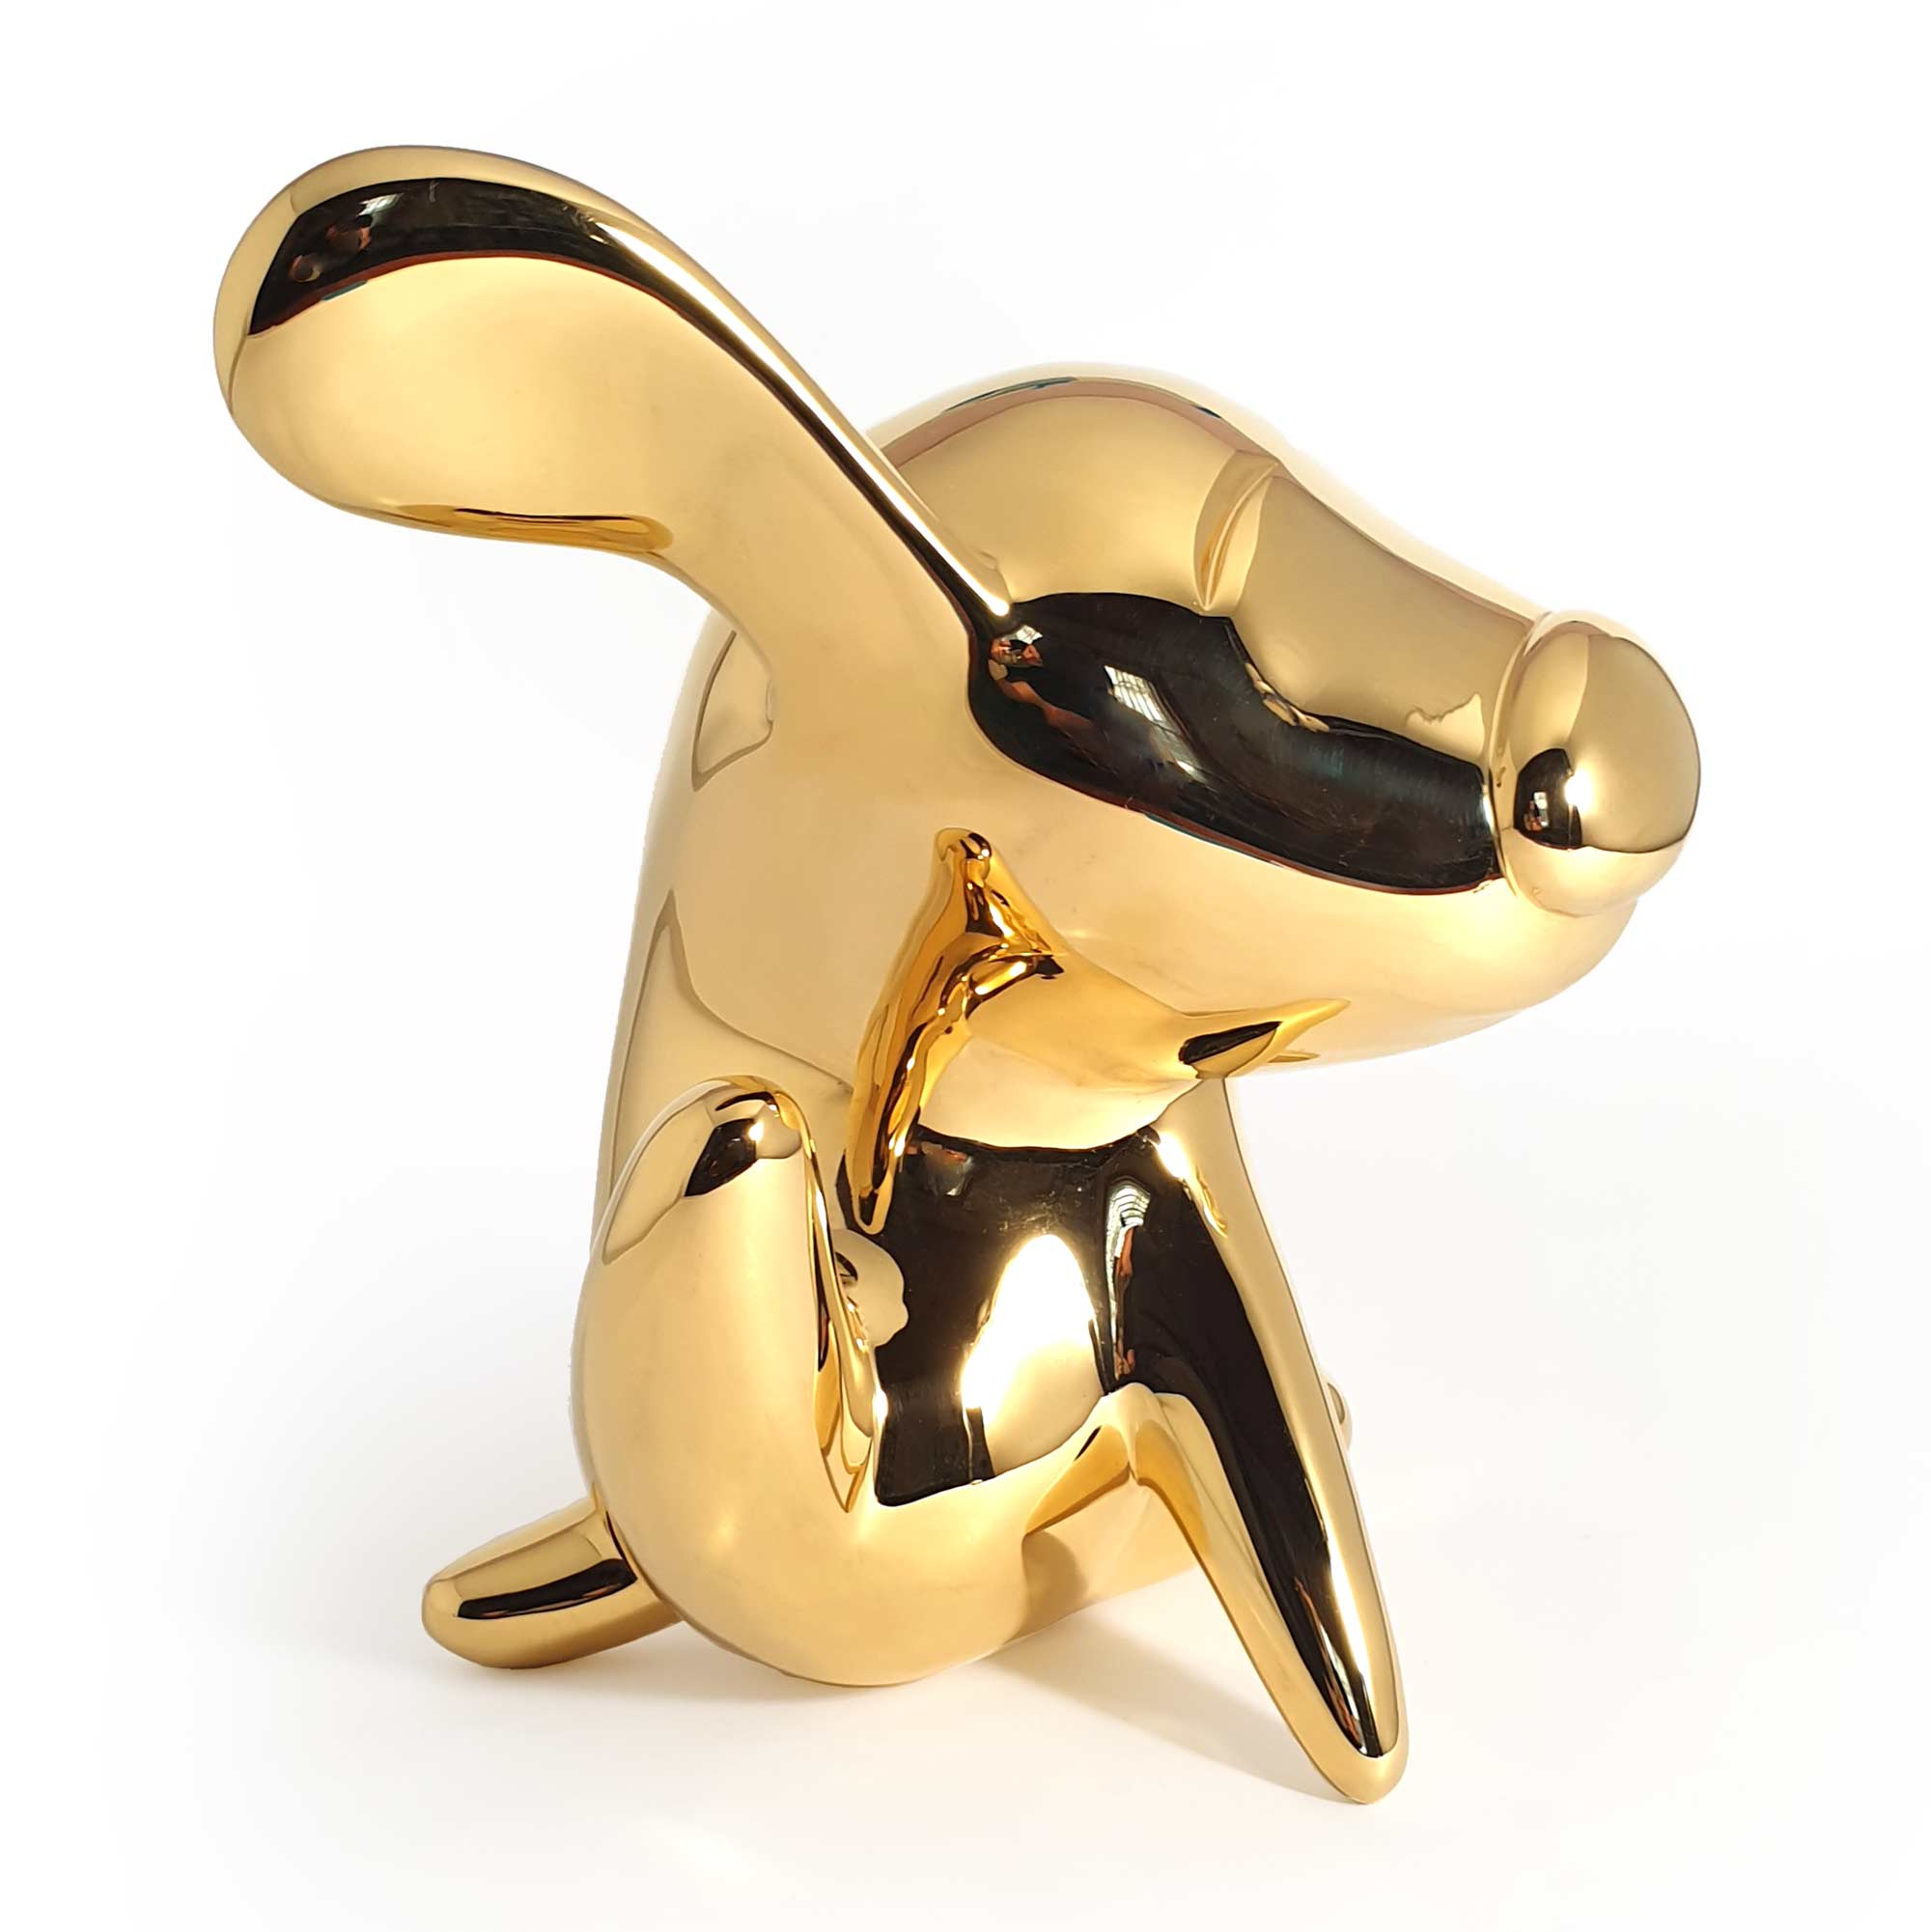 The itch, dog sculpture, Gold Mirror Polished Stainless Steel Sculpture, by artist Ferdi B Dick, side view